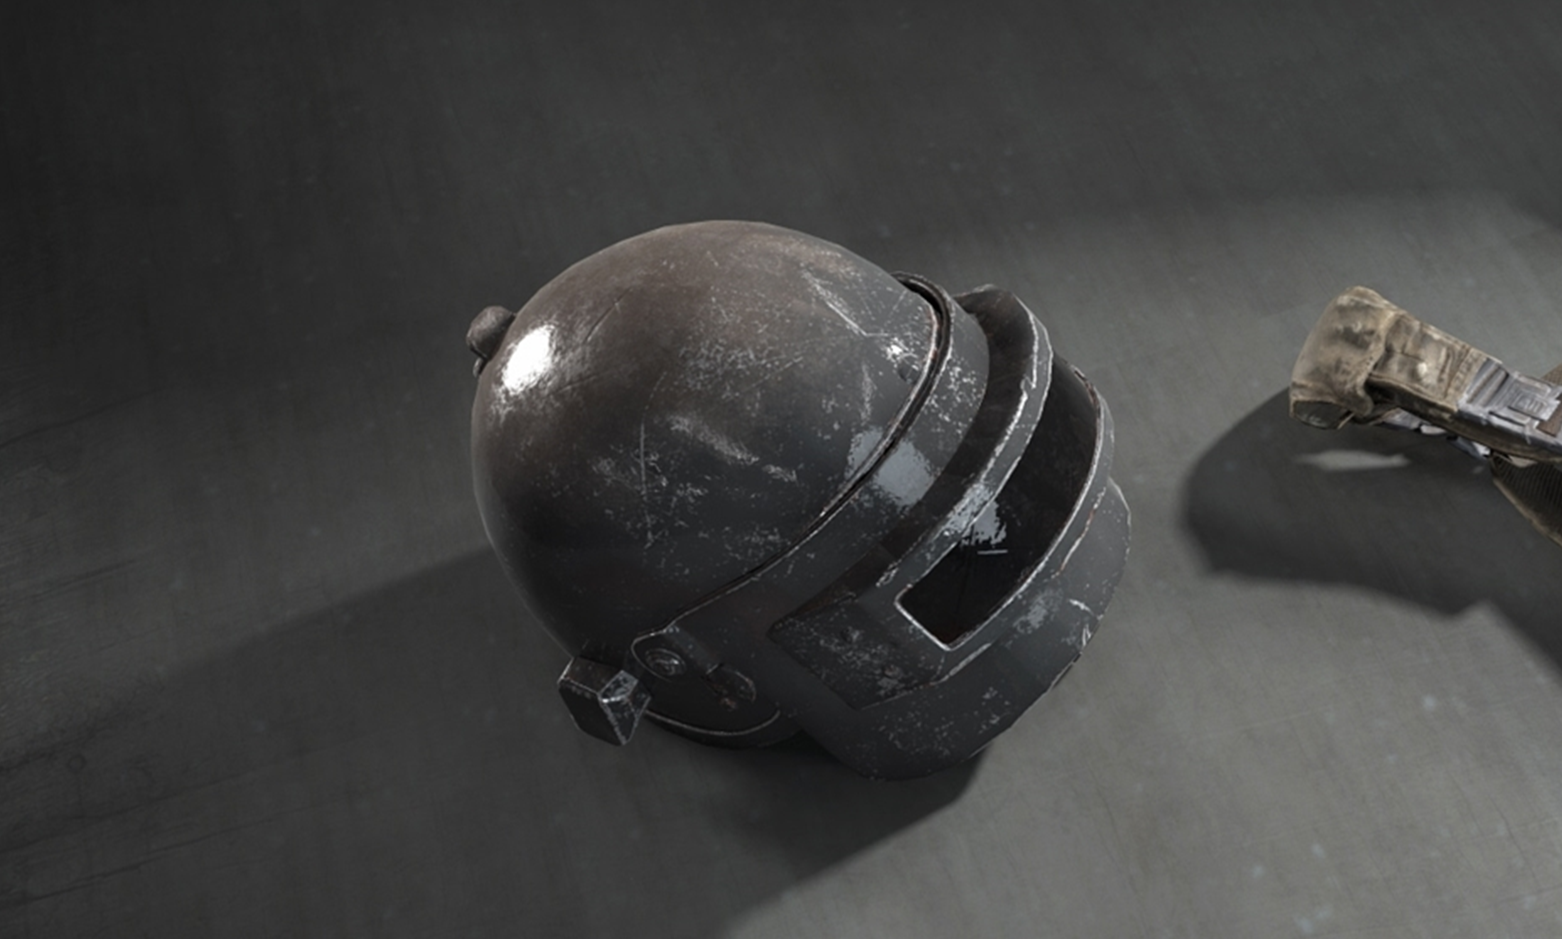 PUBG's Best Helmets Are Going To Get Harder To Find ... - 1562 x 939 png 870kB